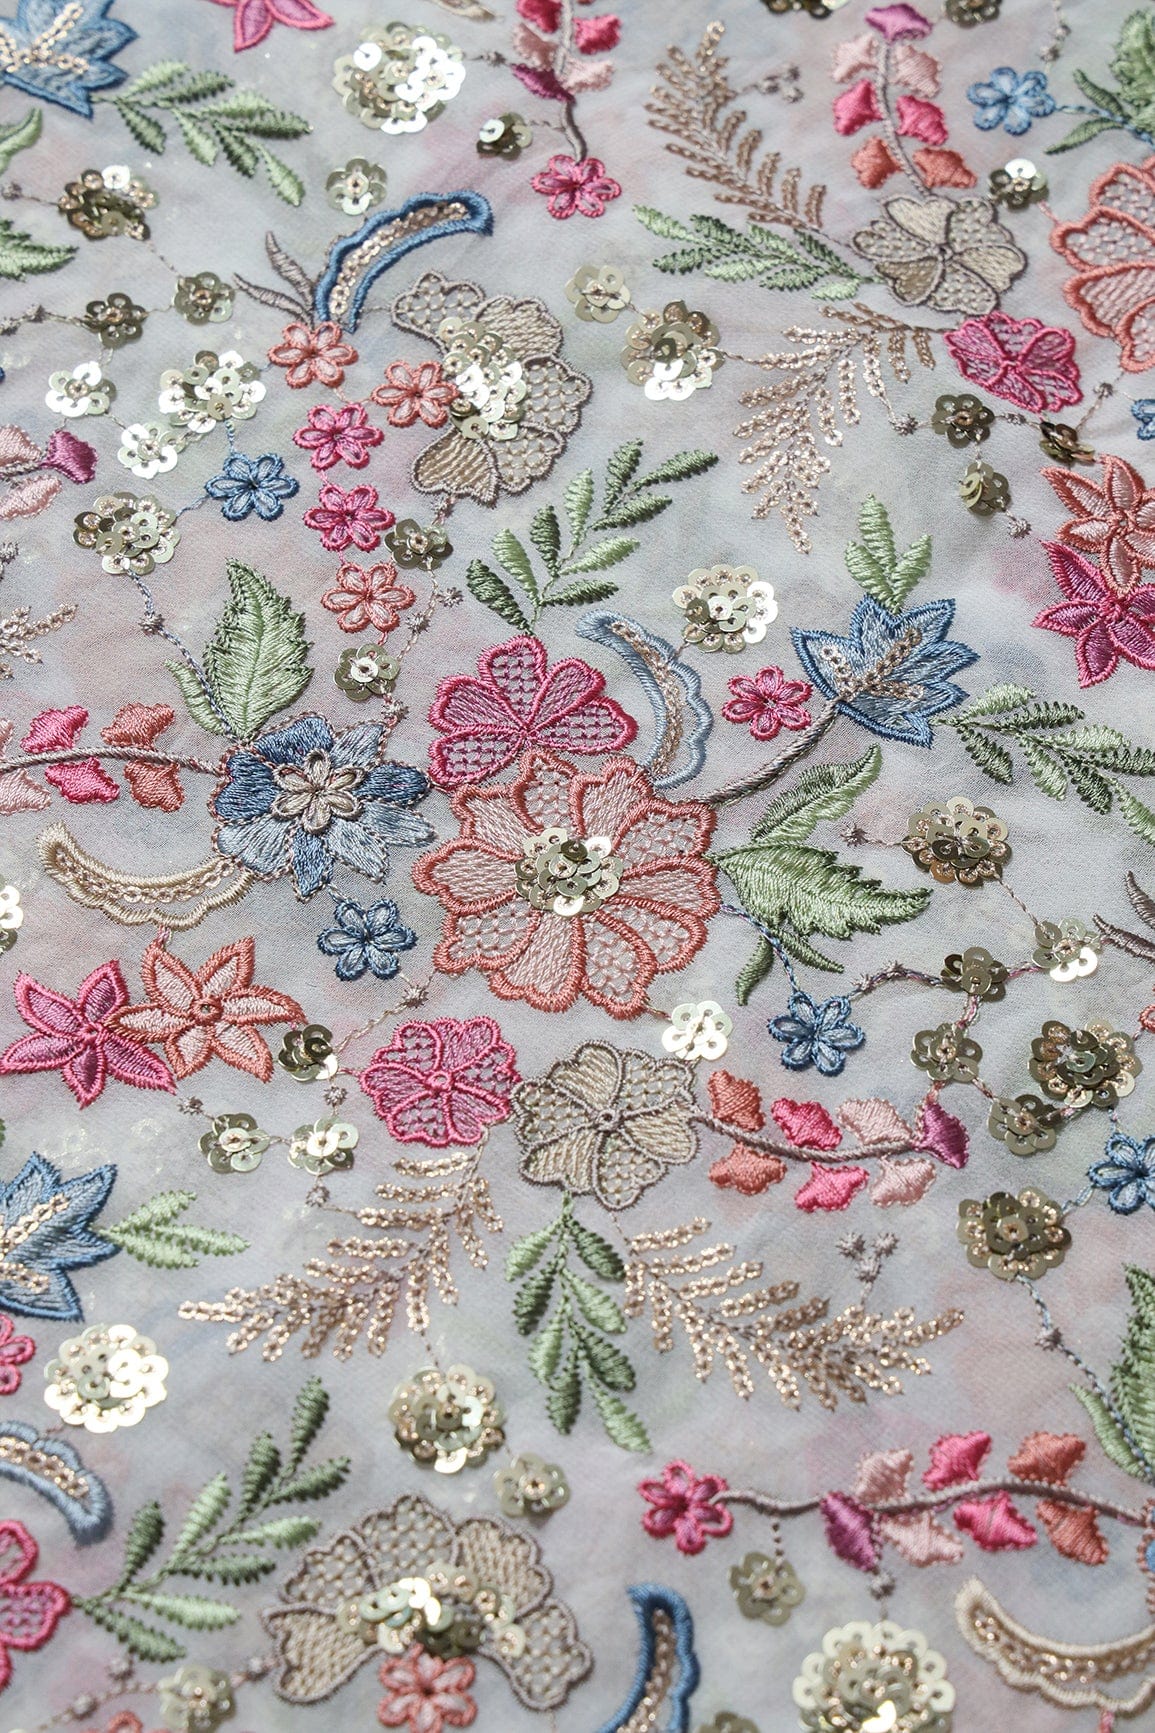 doeraa Embroidery Fabrics 1.50 Meter Cut Piece Of Delightful Pastel Thread With Gold Sequins Heavy Floral Embroidery On White Viscose Georgette Fabric